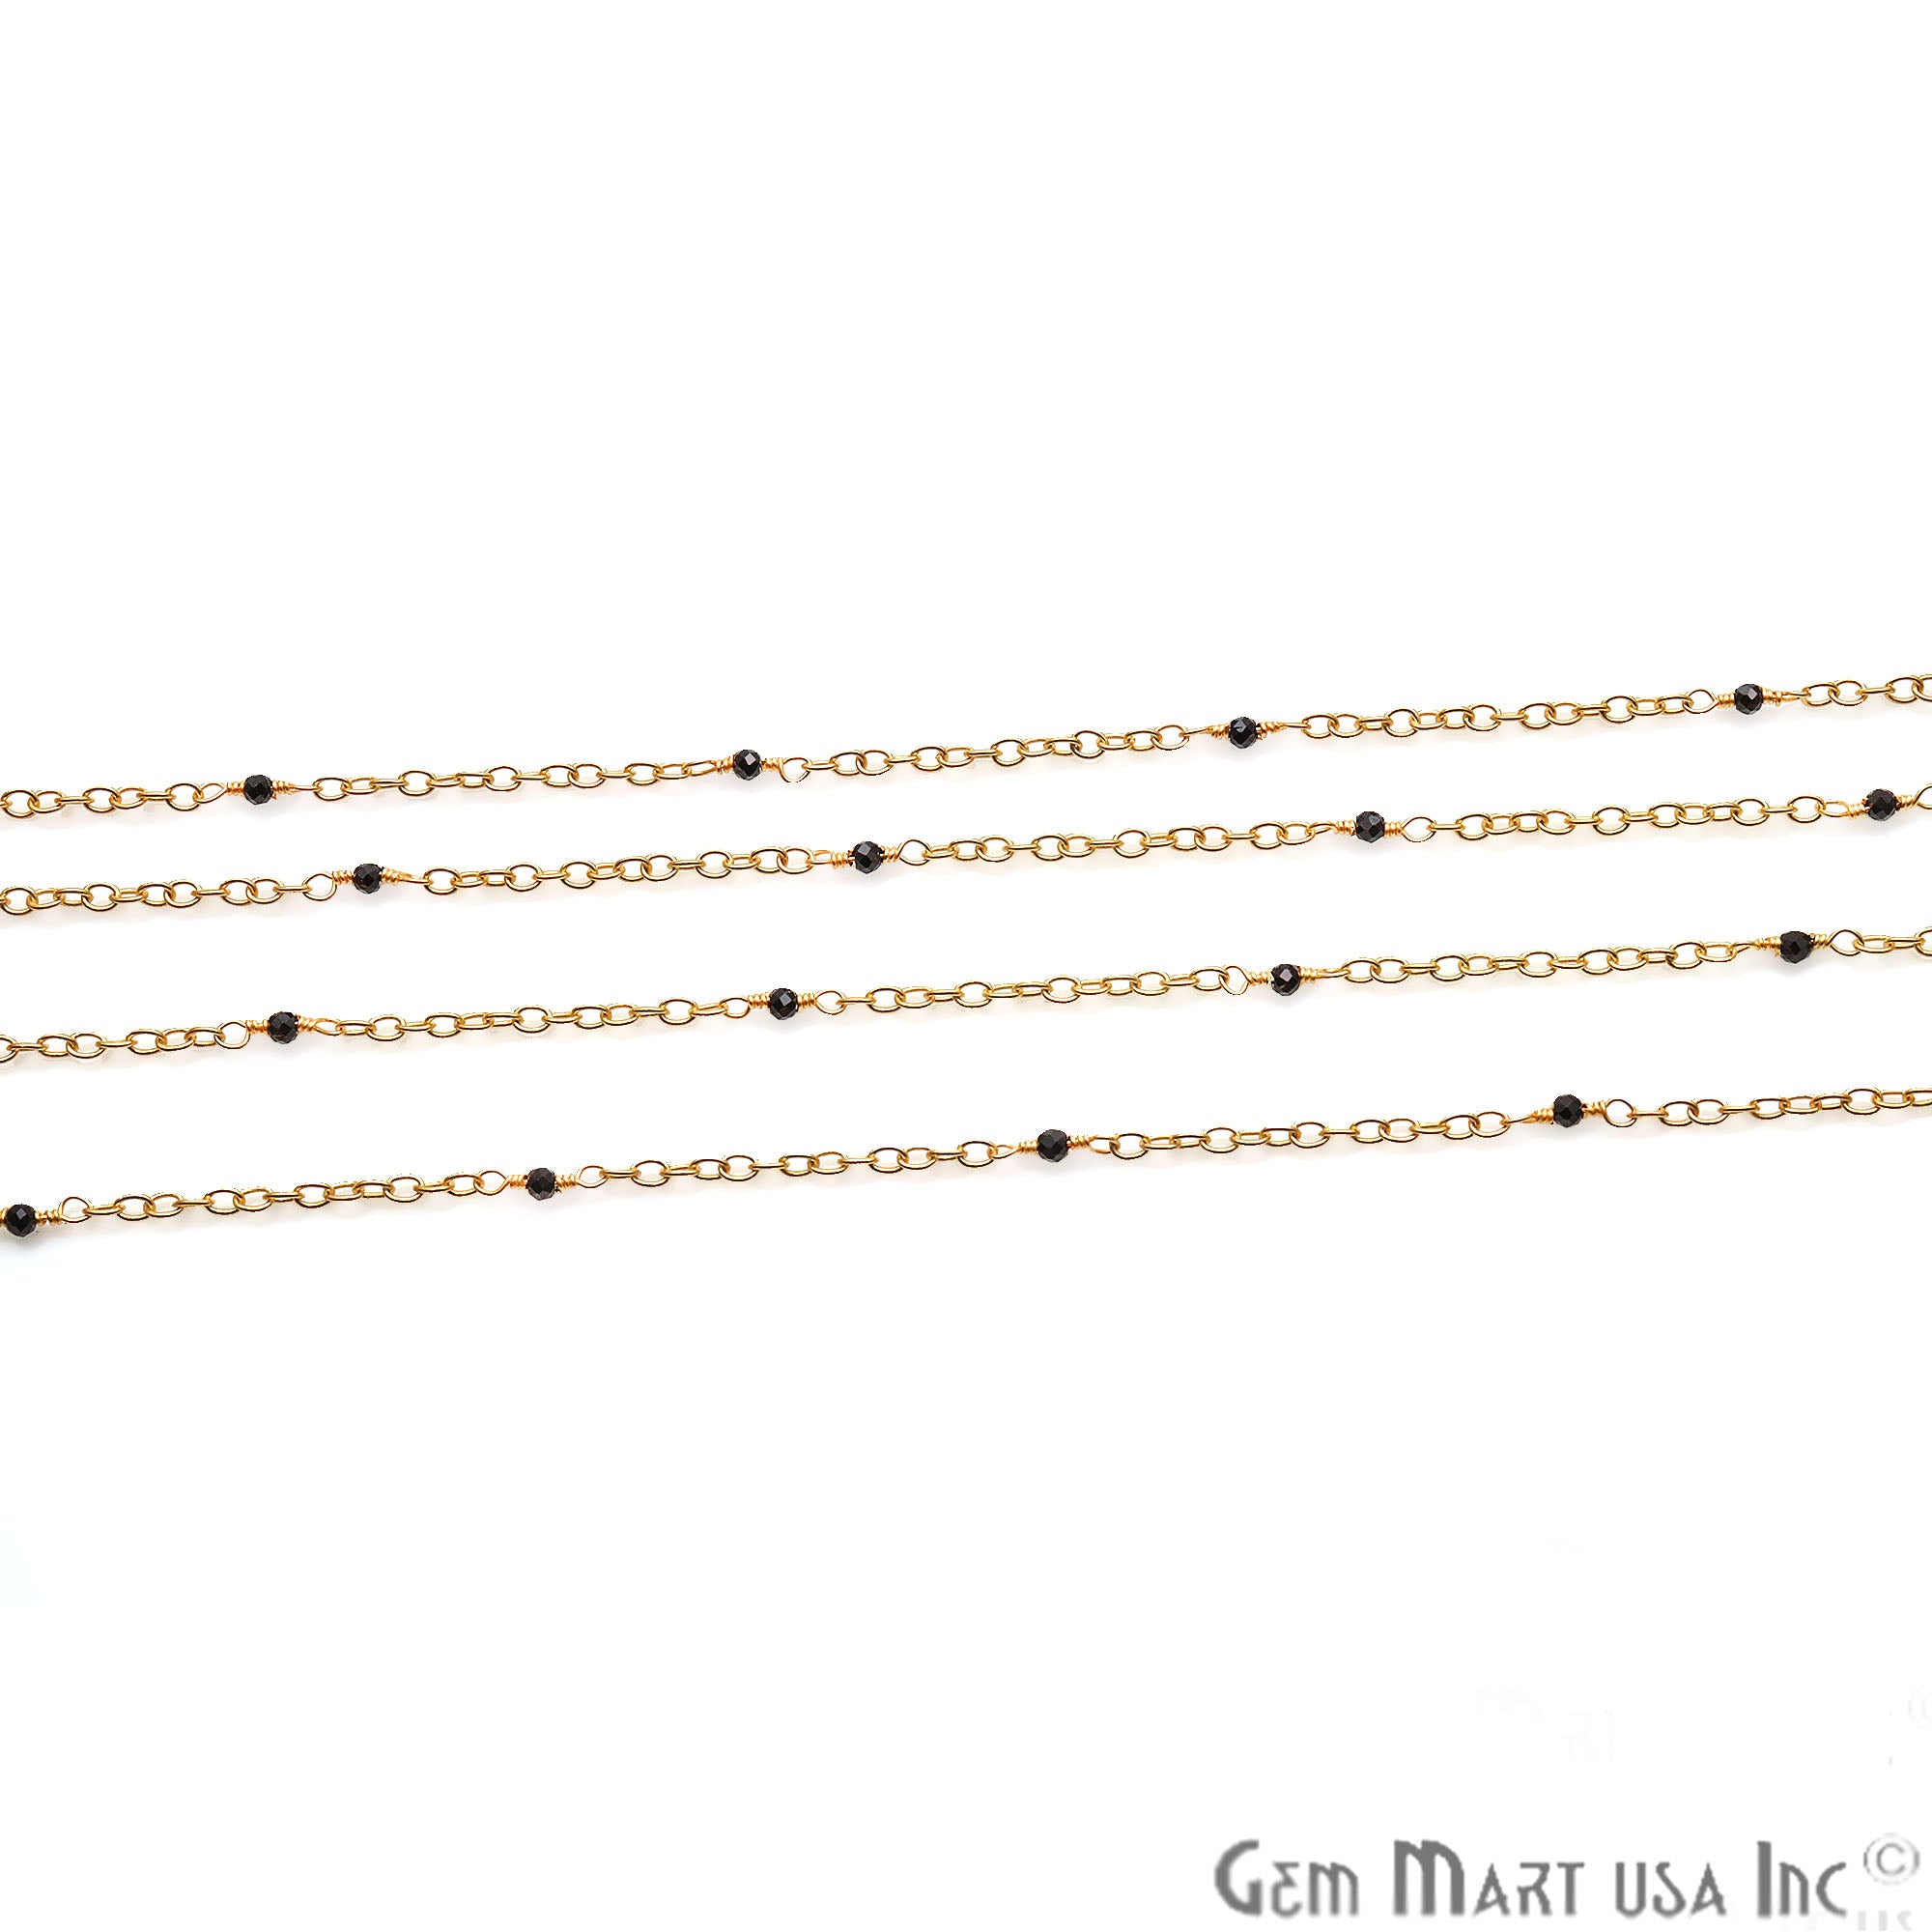 Black Spinel Round 2mm Gold Wire Wrapped Beads Rosary Chain - GemMartUSA